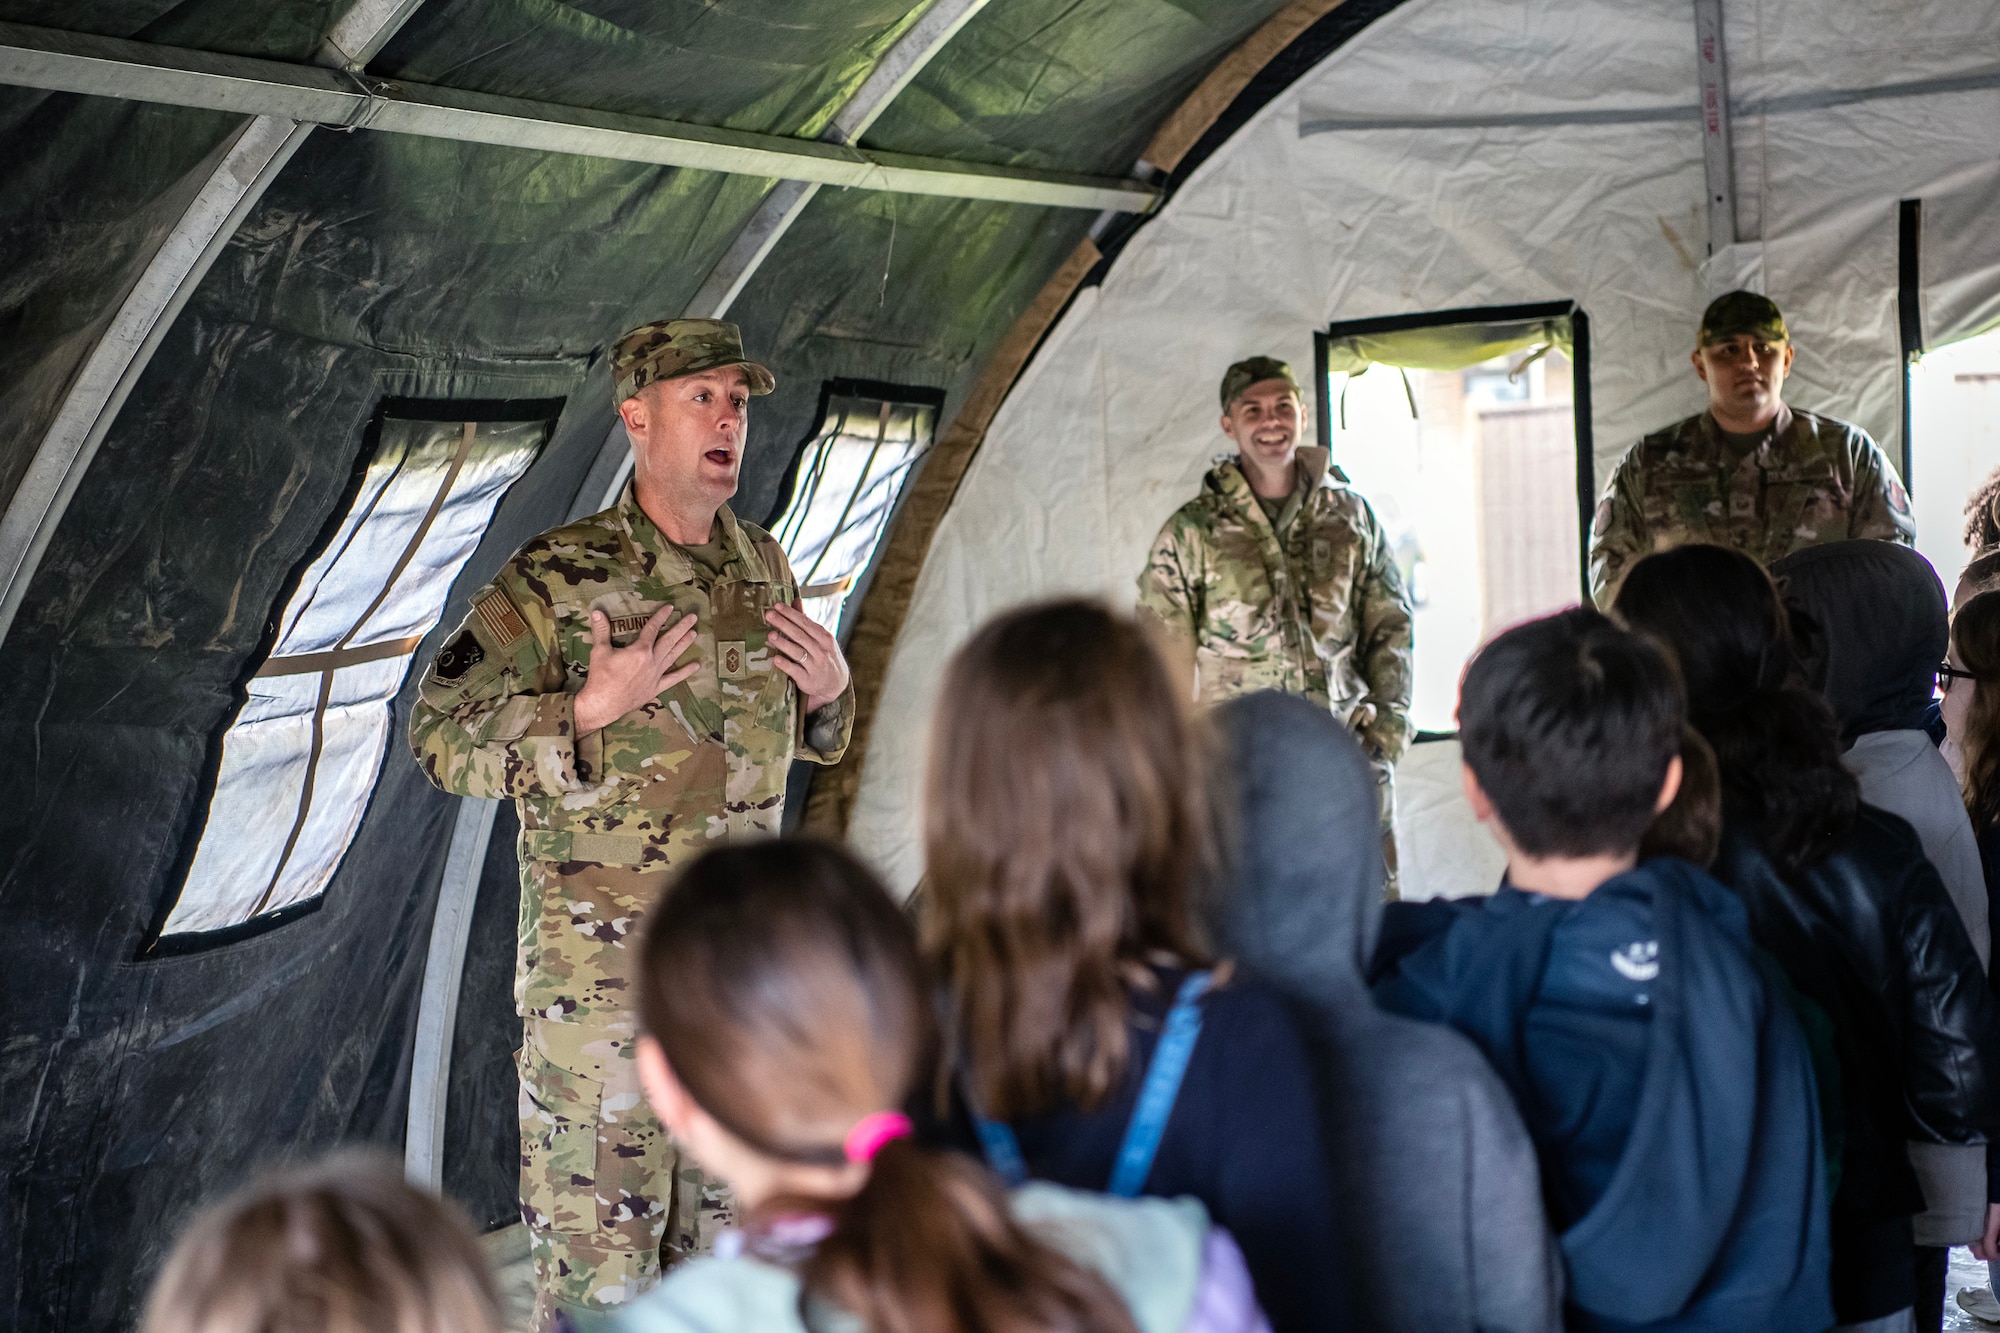 U.S. Air Force Chief Master Sgt. Joshua Trundle, 501st Combat Support Wing command chief, speaks to Alconbury Elementary school students during Camp Kudos at RAF Alconbury, England, April 14, 2023. The camp gave students the opportunity to experience and learn about various aspects of deployment preparation and the wing mission. (U.S. Air Force photo by Staff Sgt. Eugene Oliver)